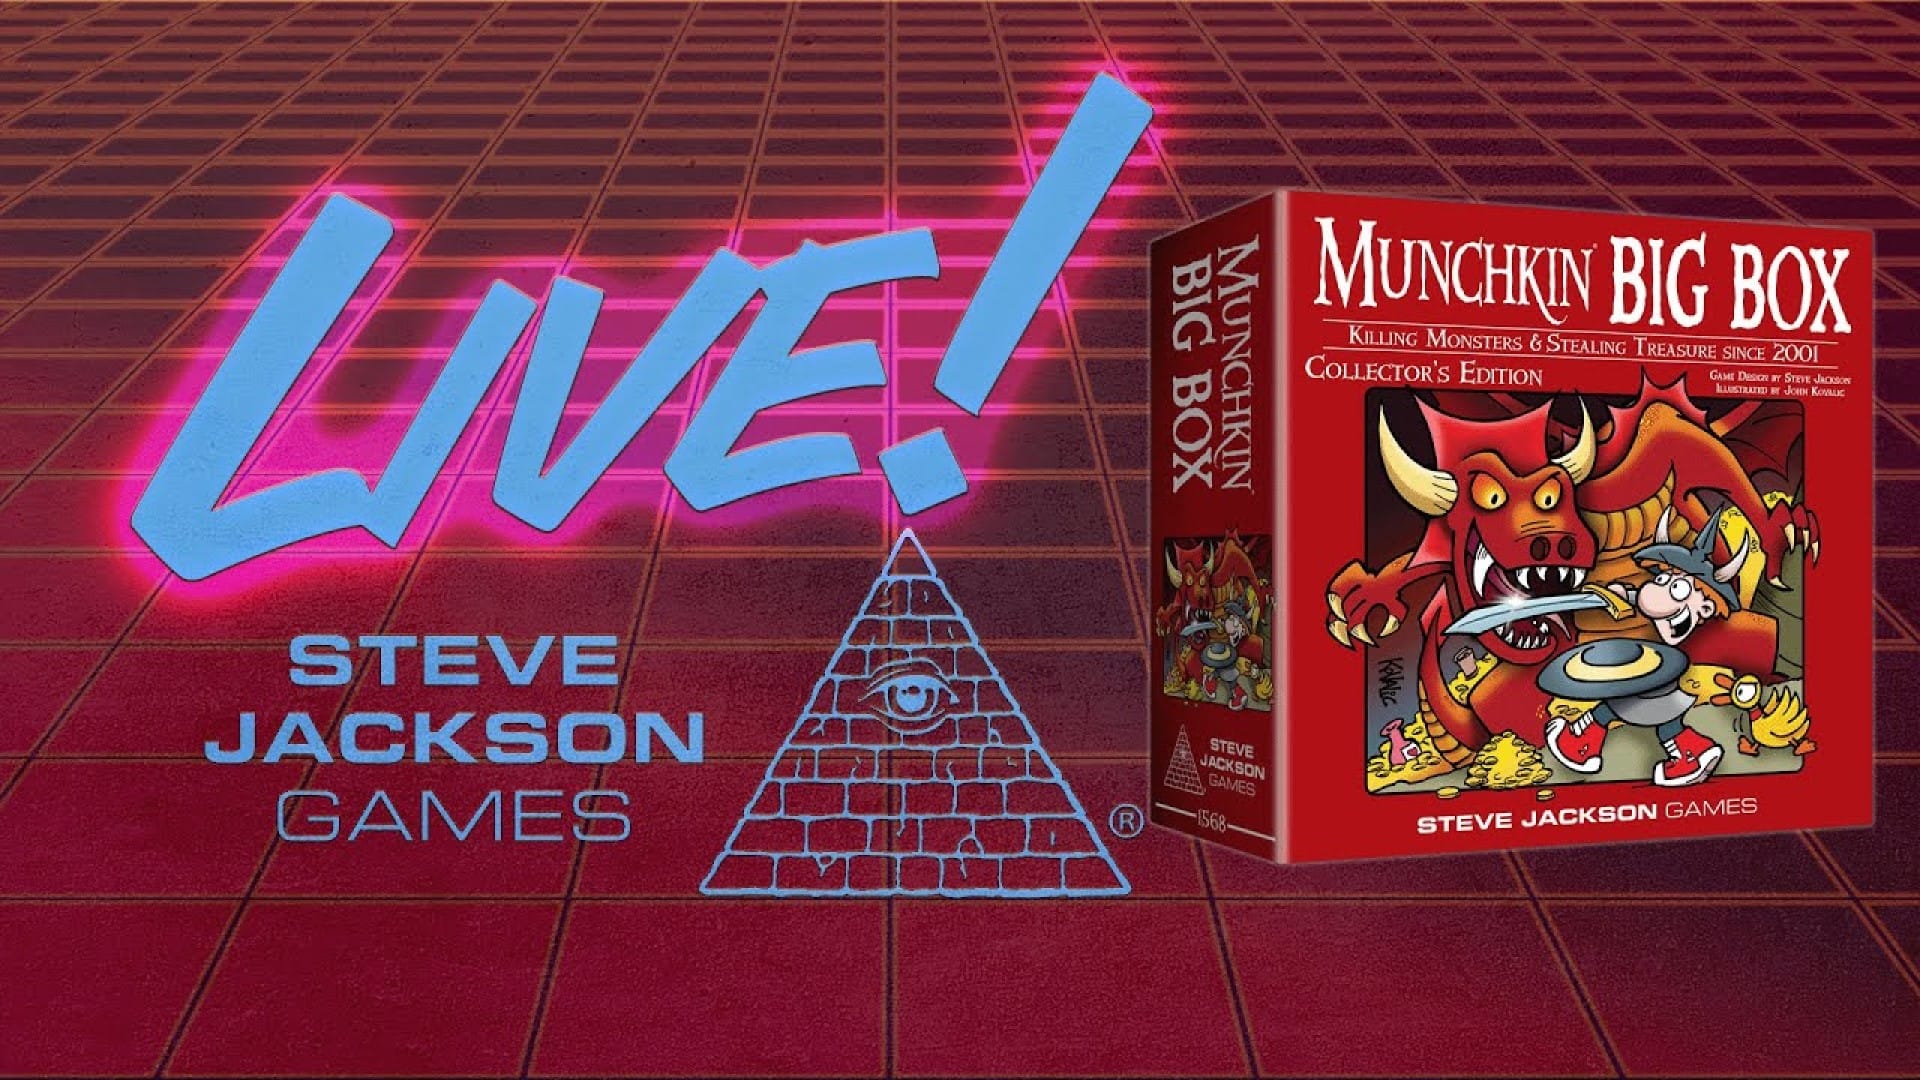 Promo Image of the Munchkin Big Box Backerkit campaign, showing box art alongside the word "Live!" in large letters.